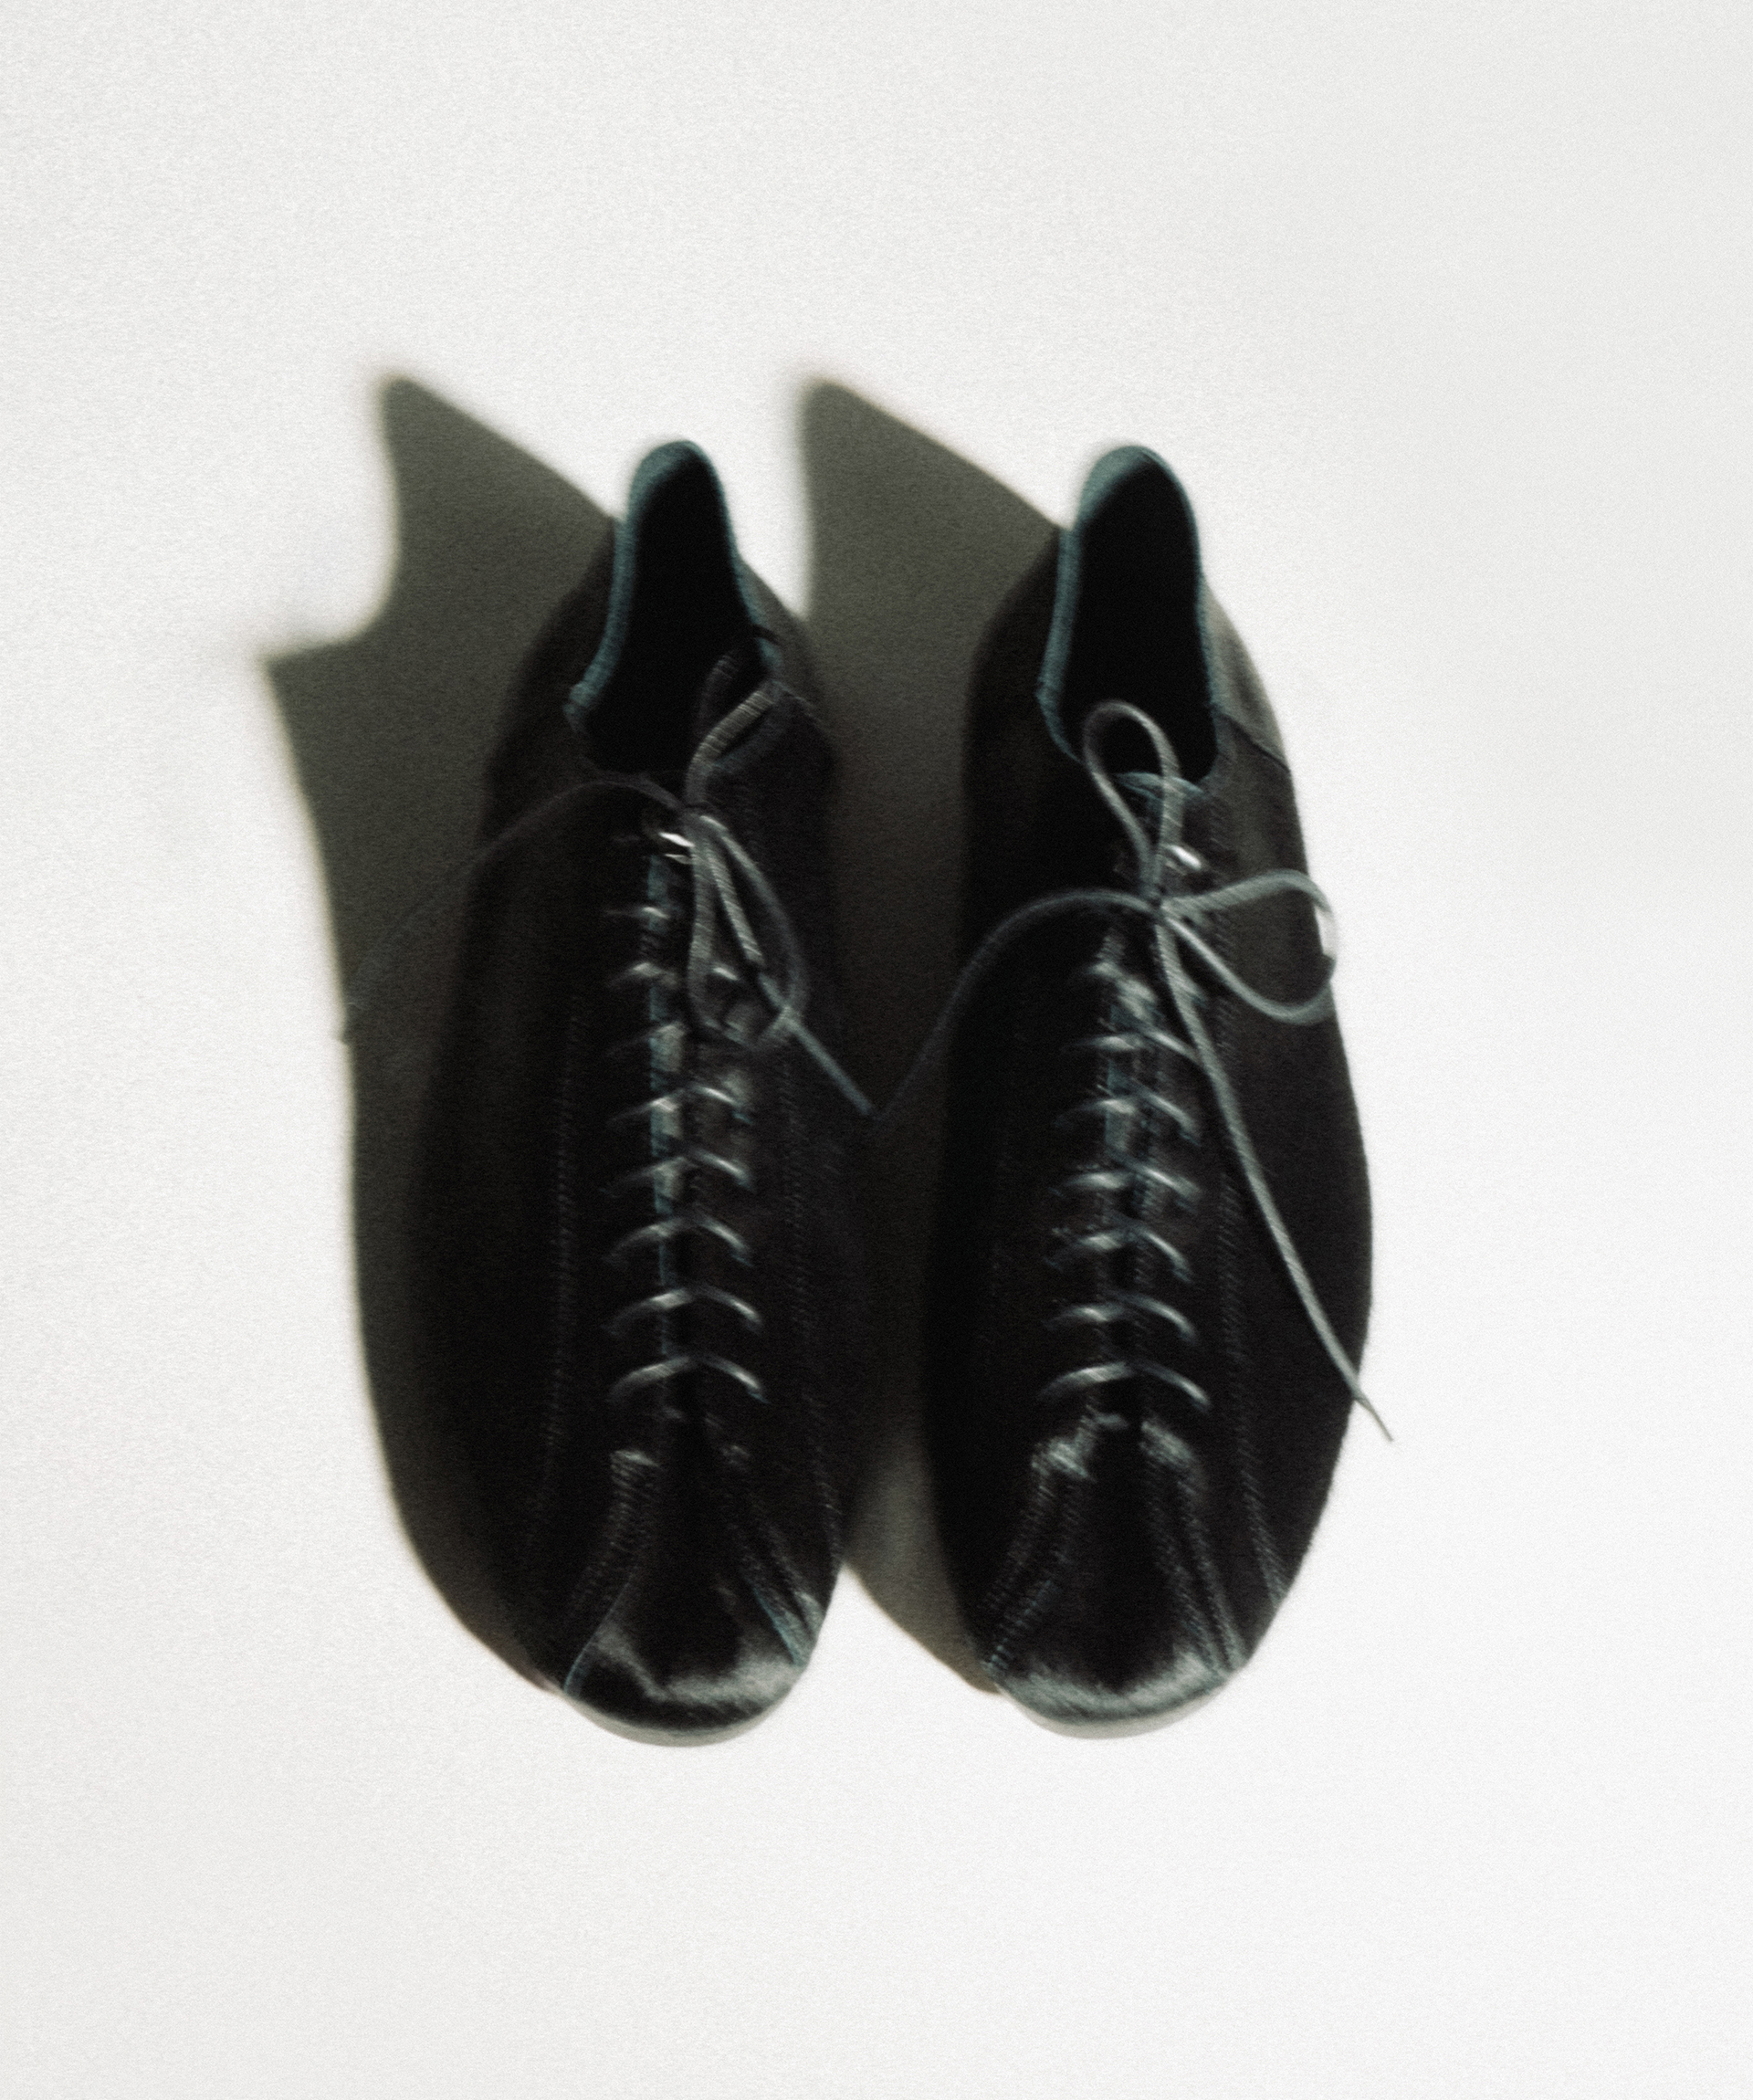 Square Toe Lace-up, Round Toe Lace-up